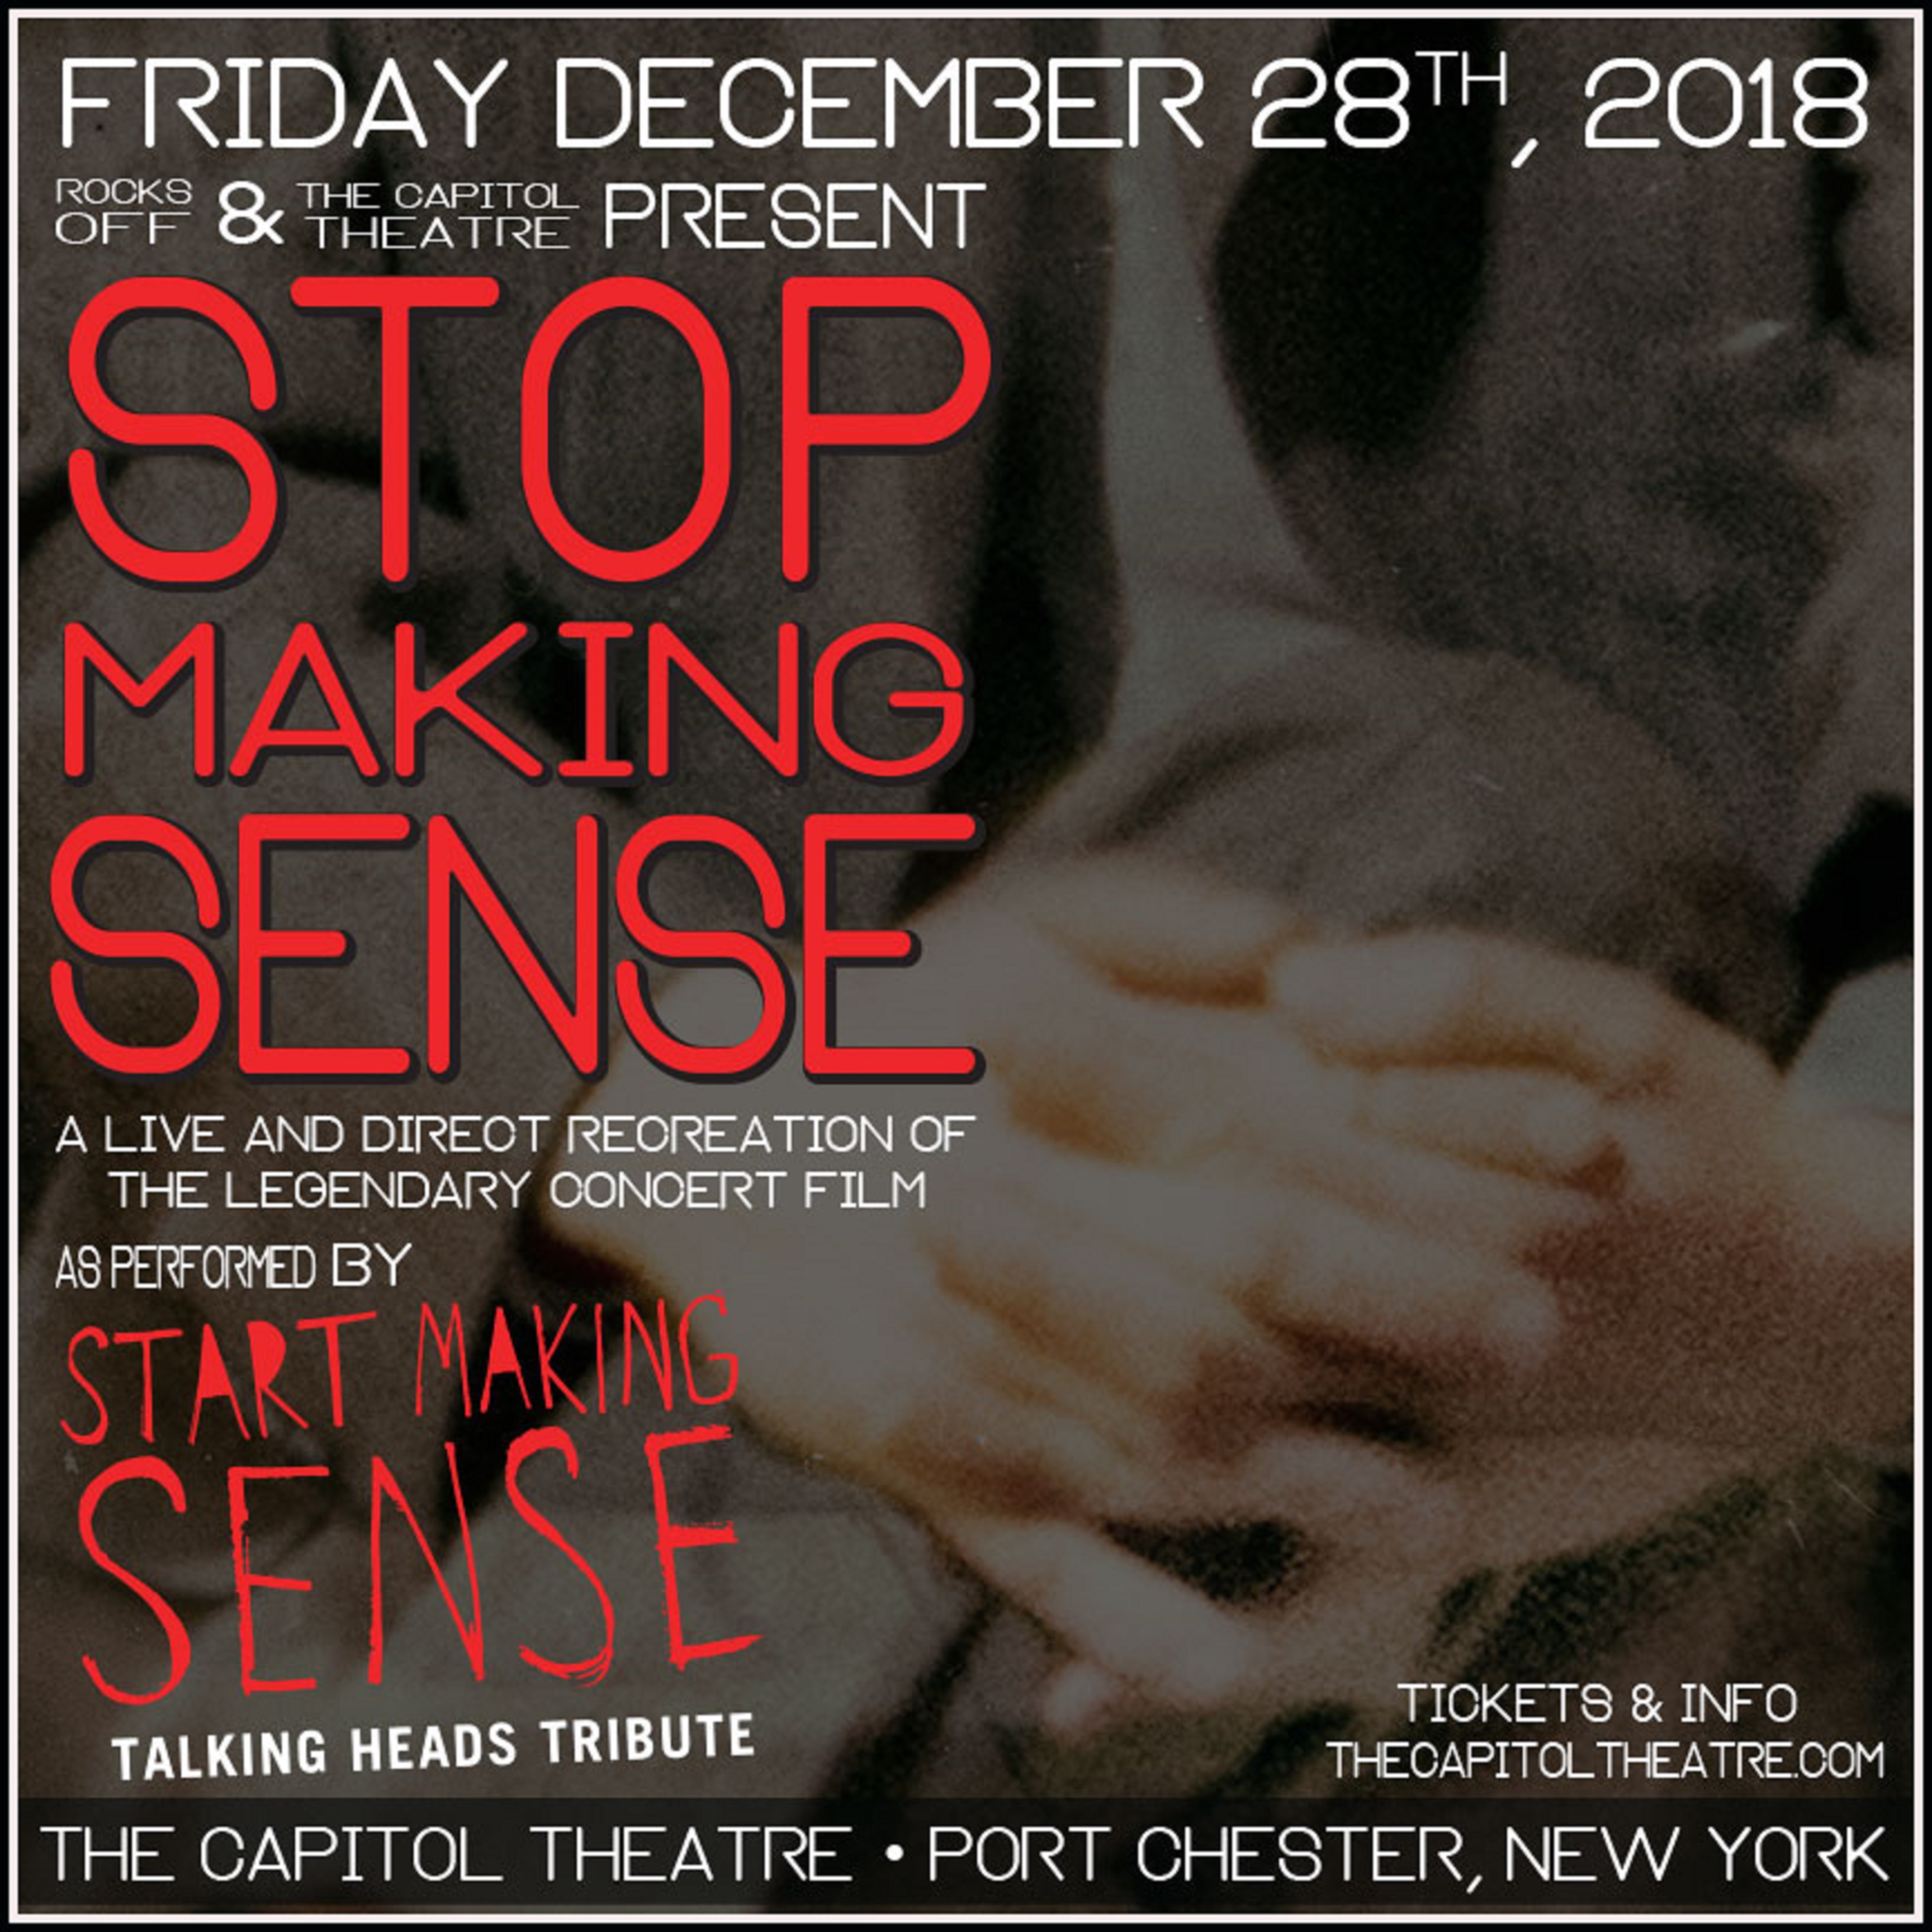 Stop Making Sense Re-Creation at The Cap on Friday, December 28